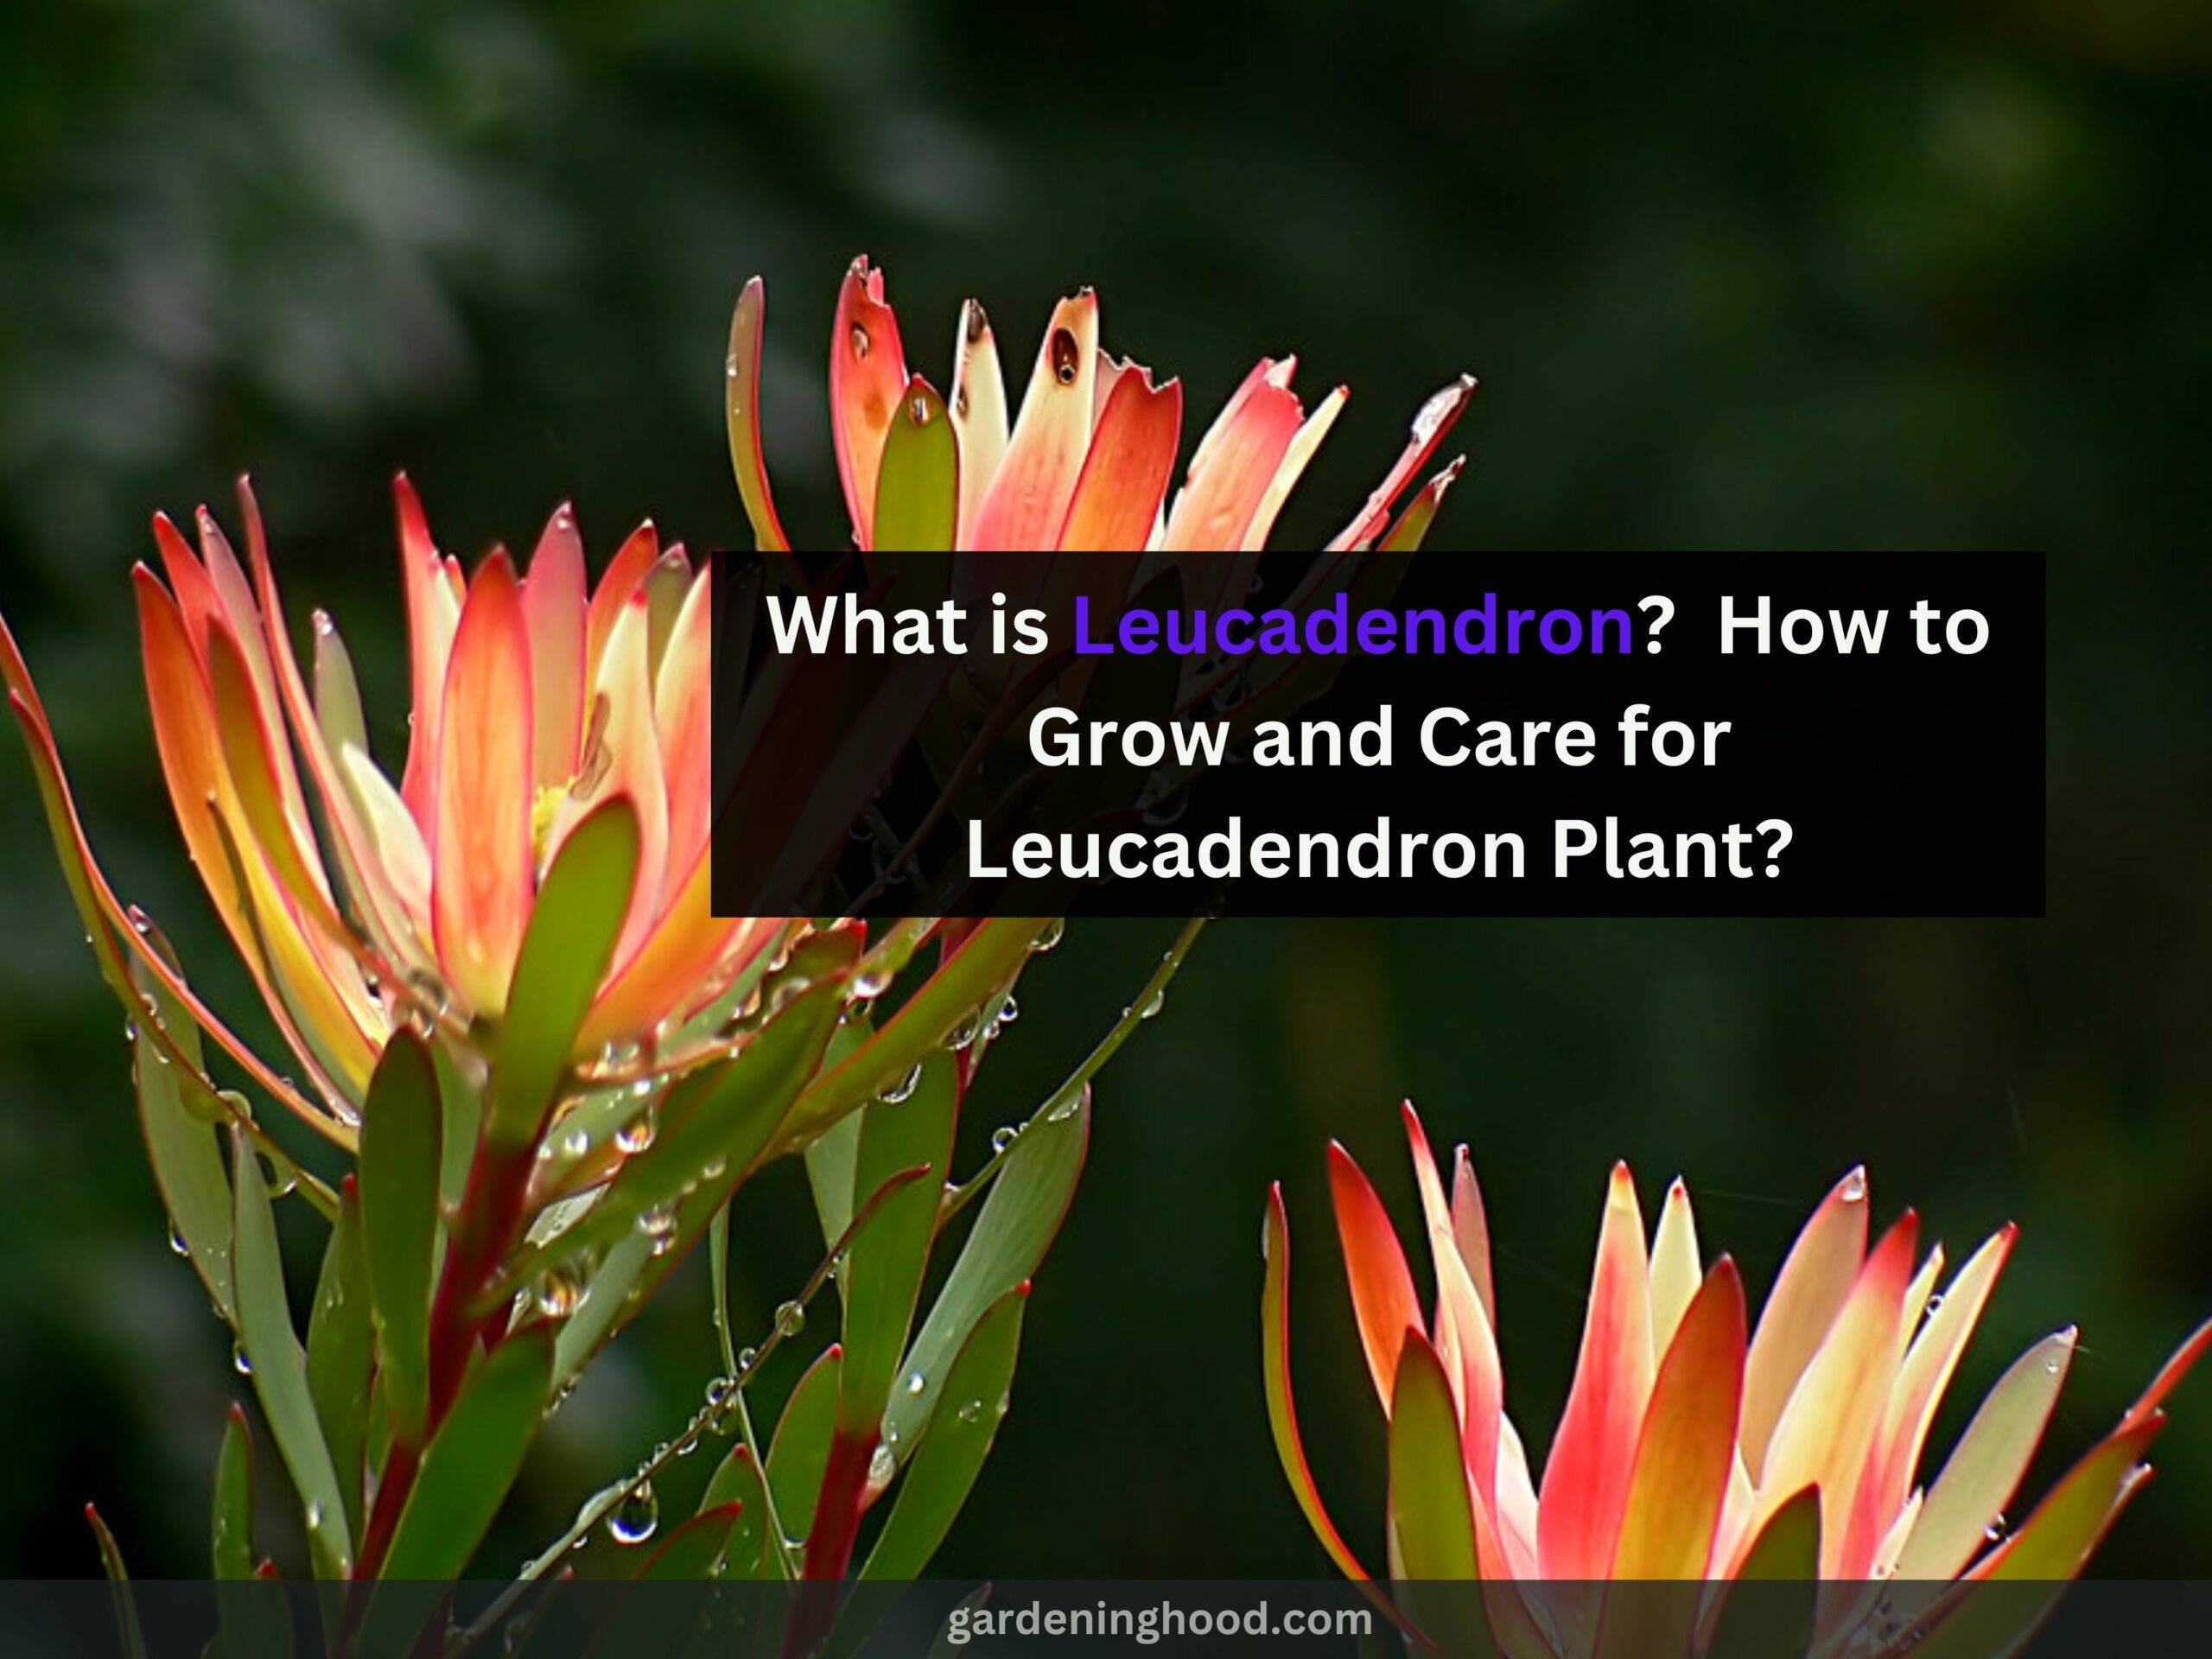 What is Leucadendron? - How to Grow and Care for Leucadendron Plant?